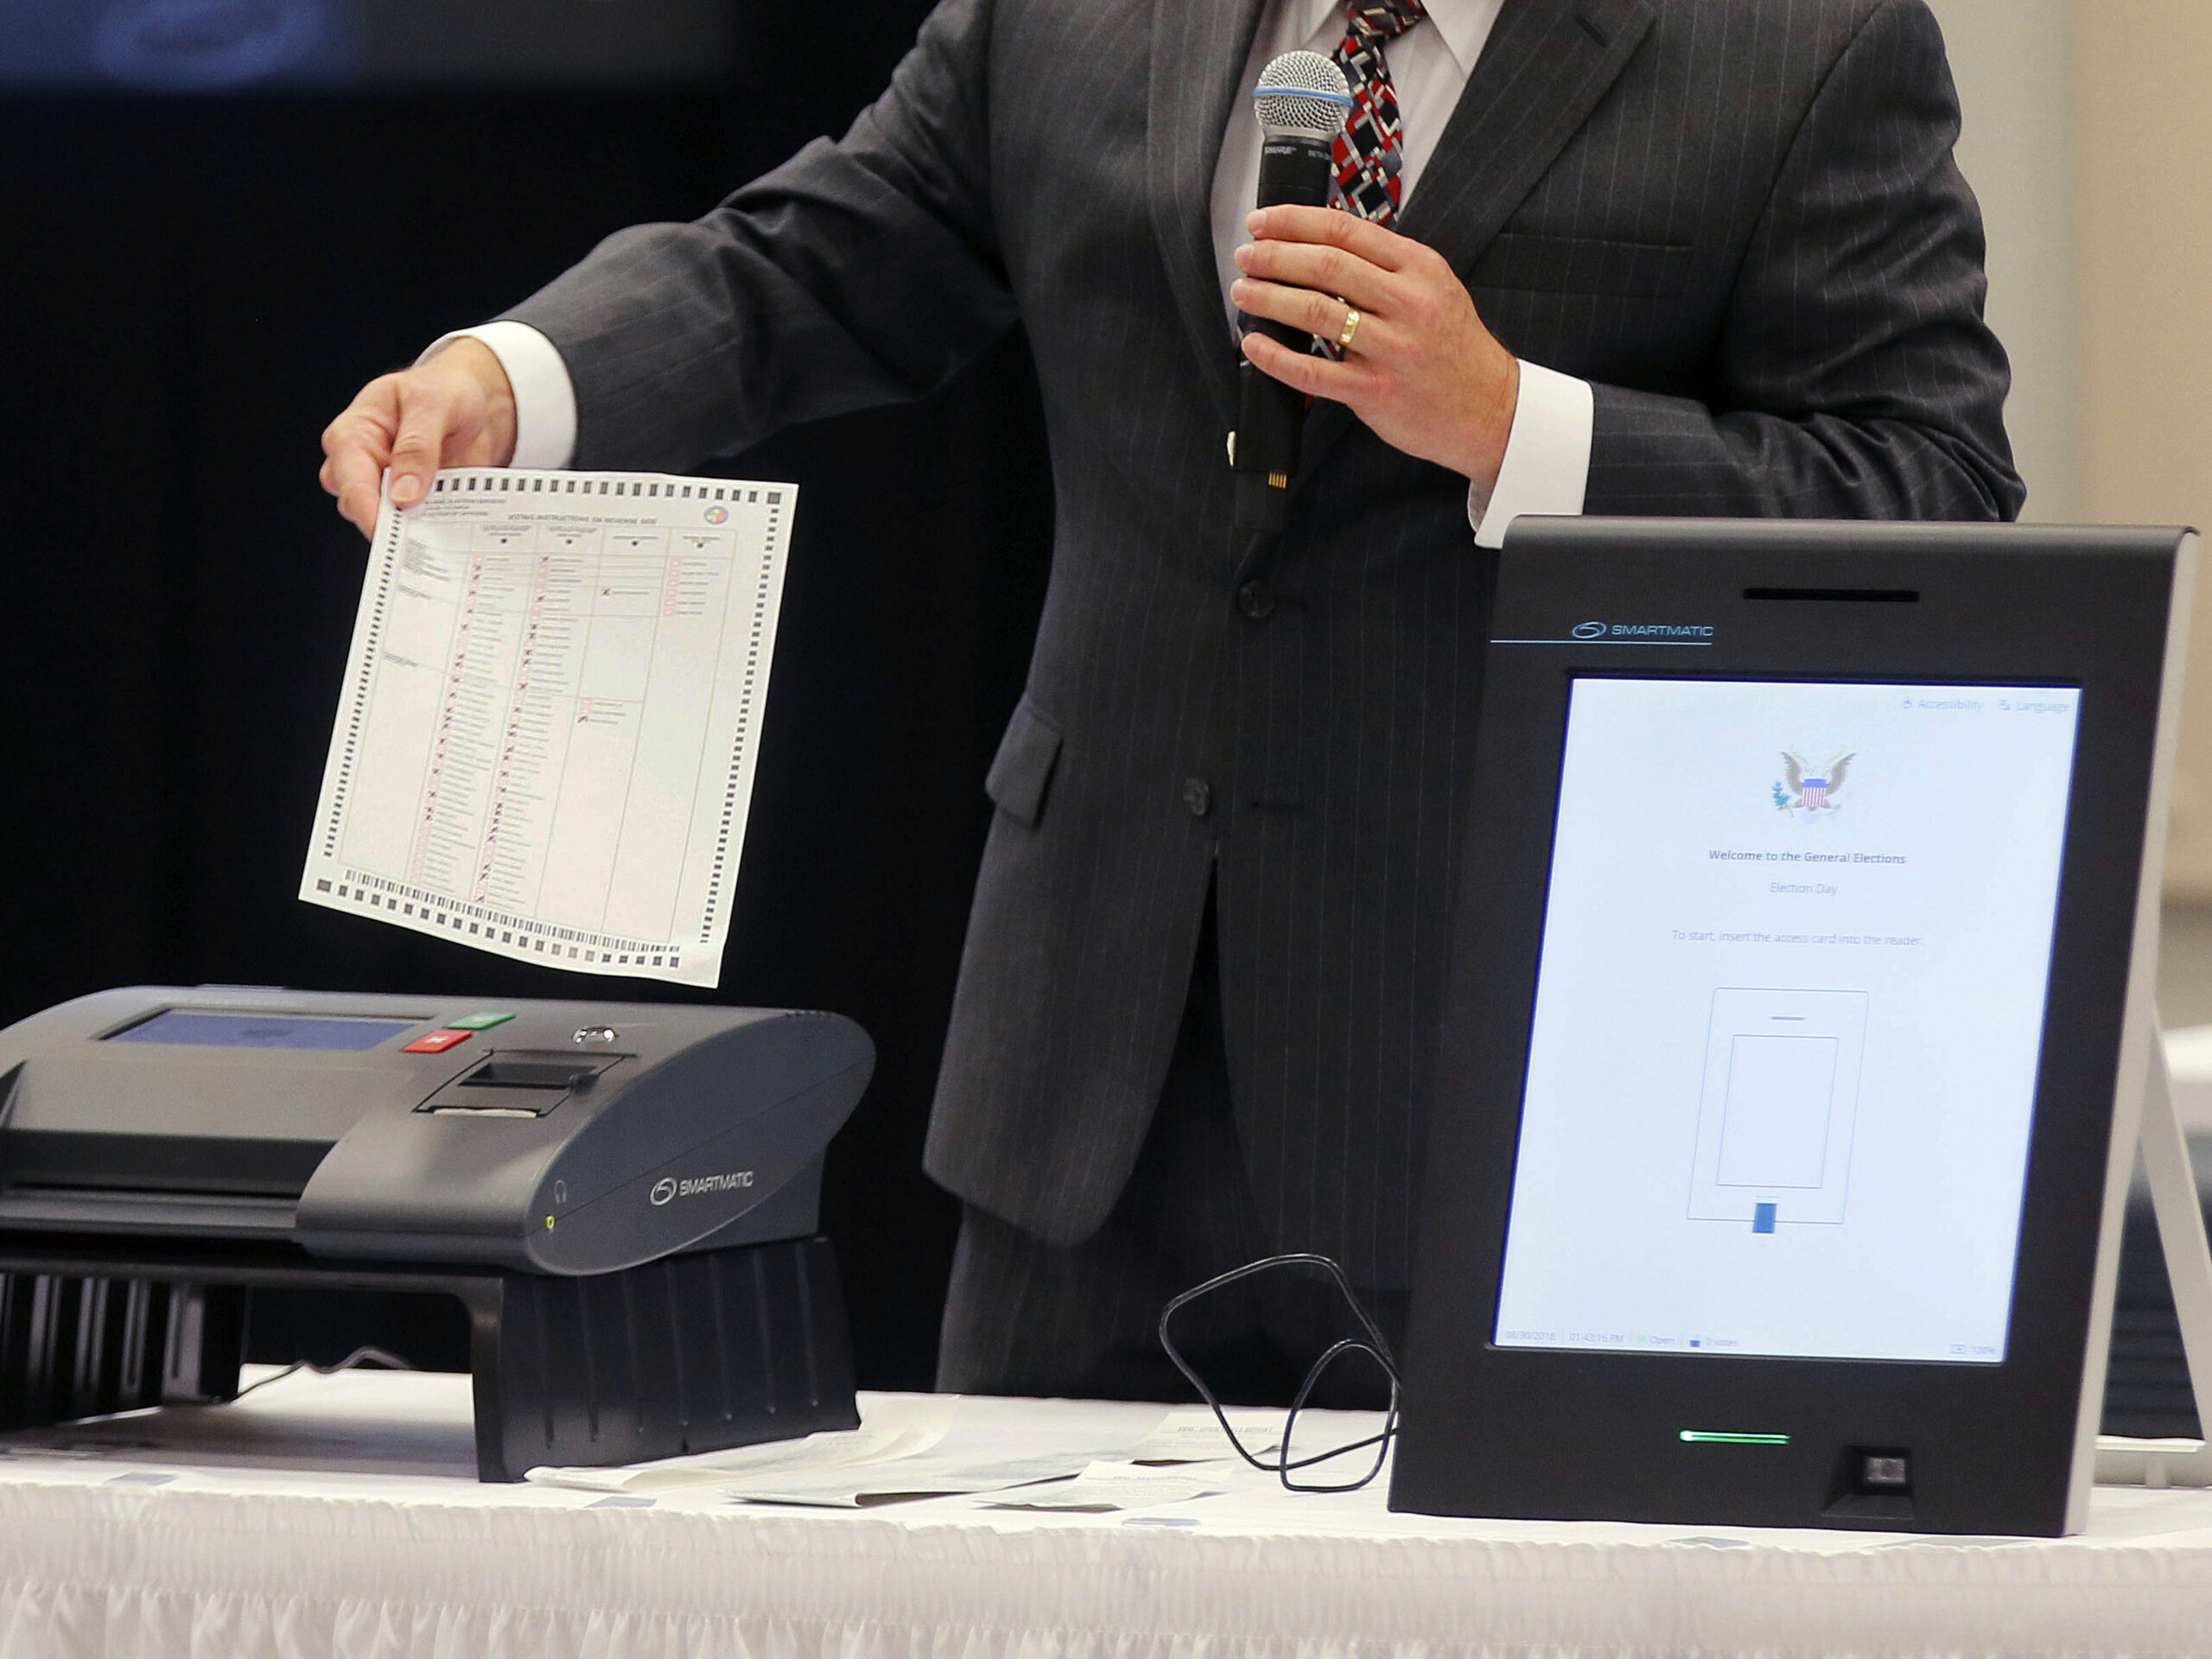 A Smartmatic representative demonstrates his company's system, which has scanners and touch screens with printout options, at a meeting of the Secure, Accessible & Fair Elections Commission, on Aug. 30, 2018, in Grovetown, Ga.